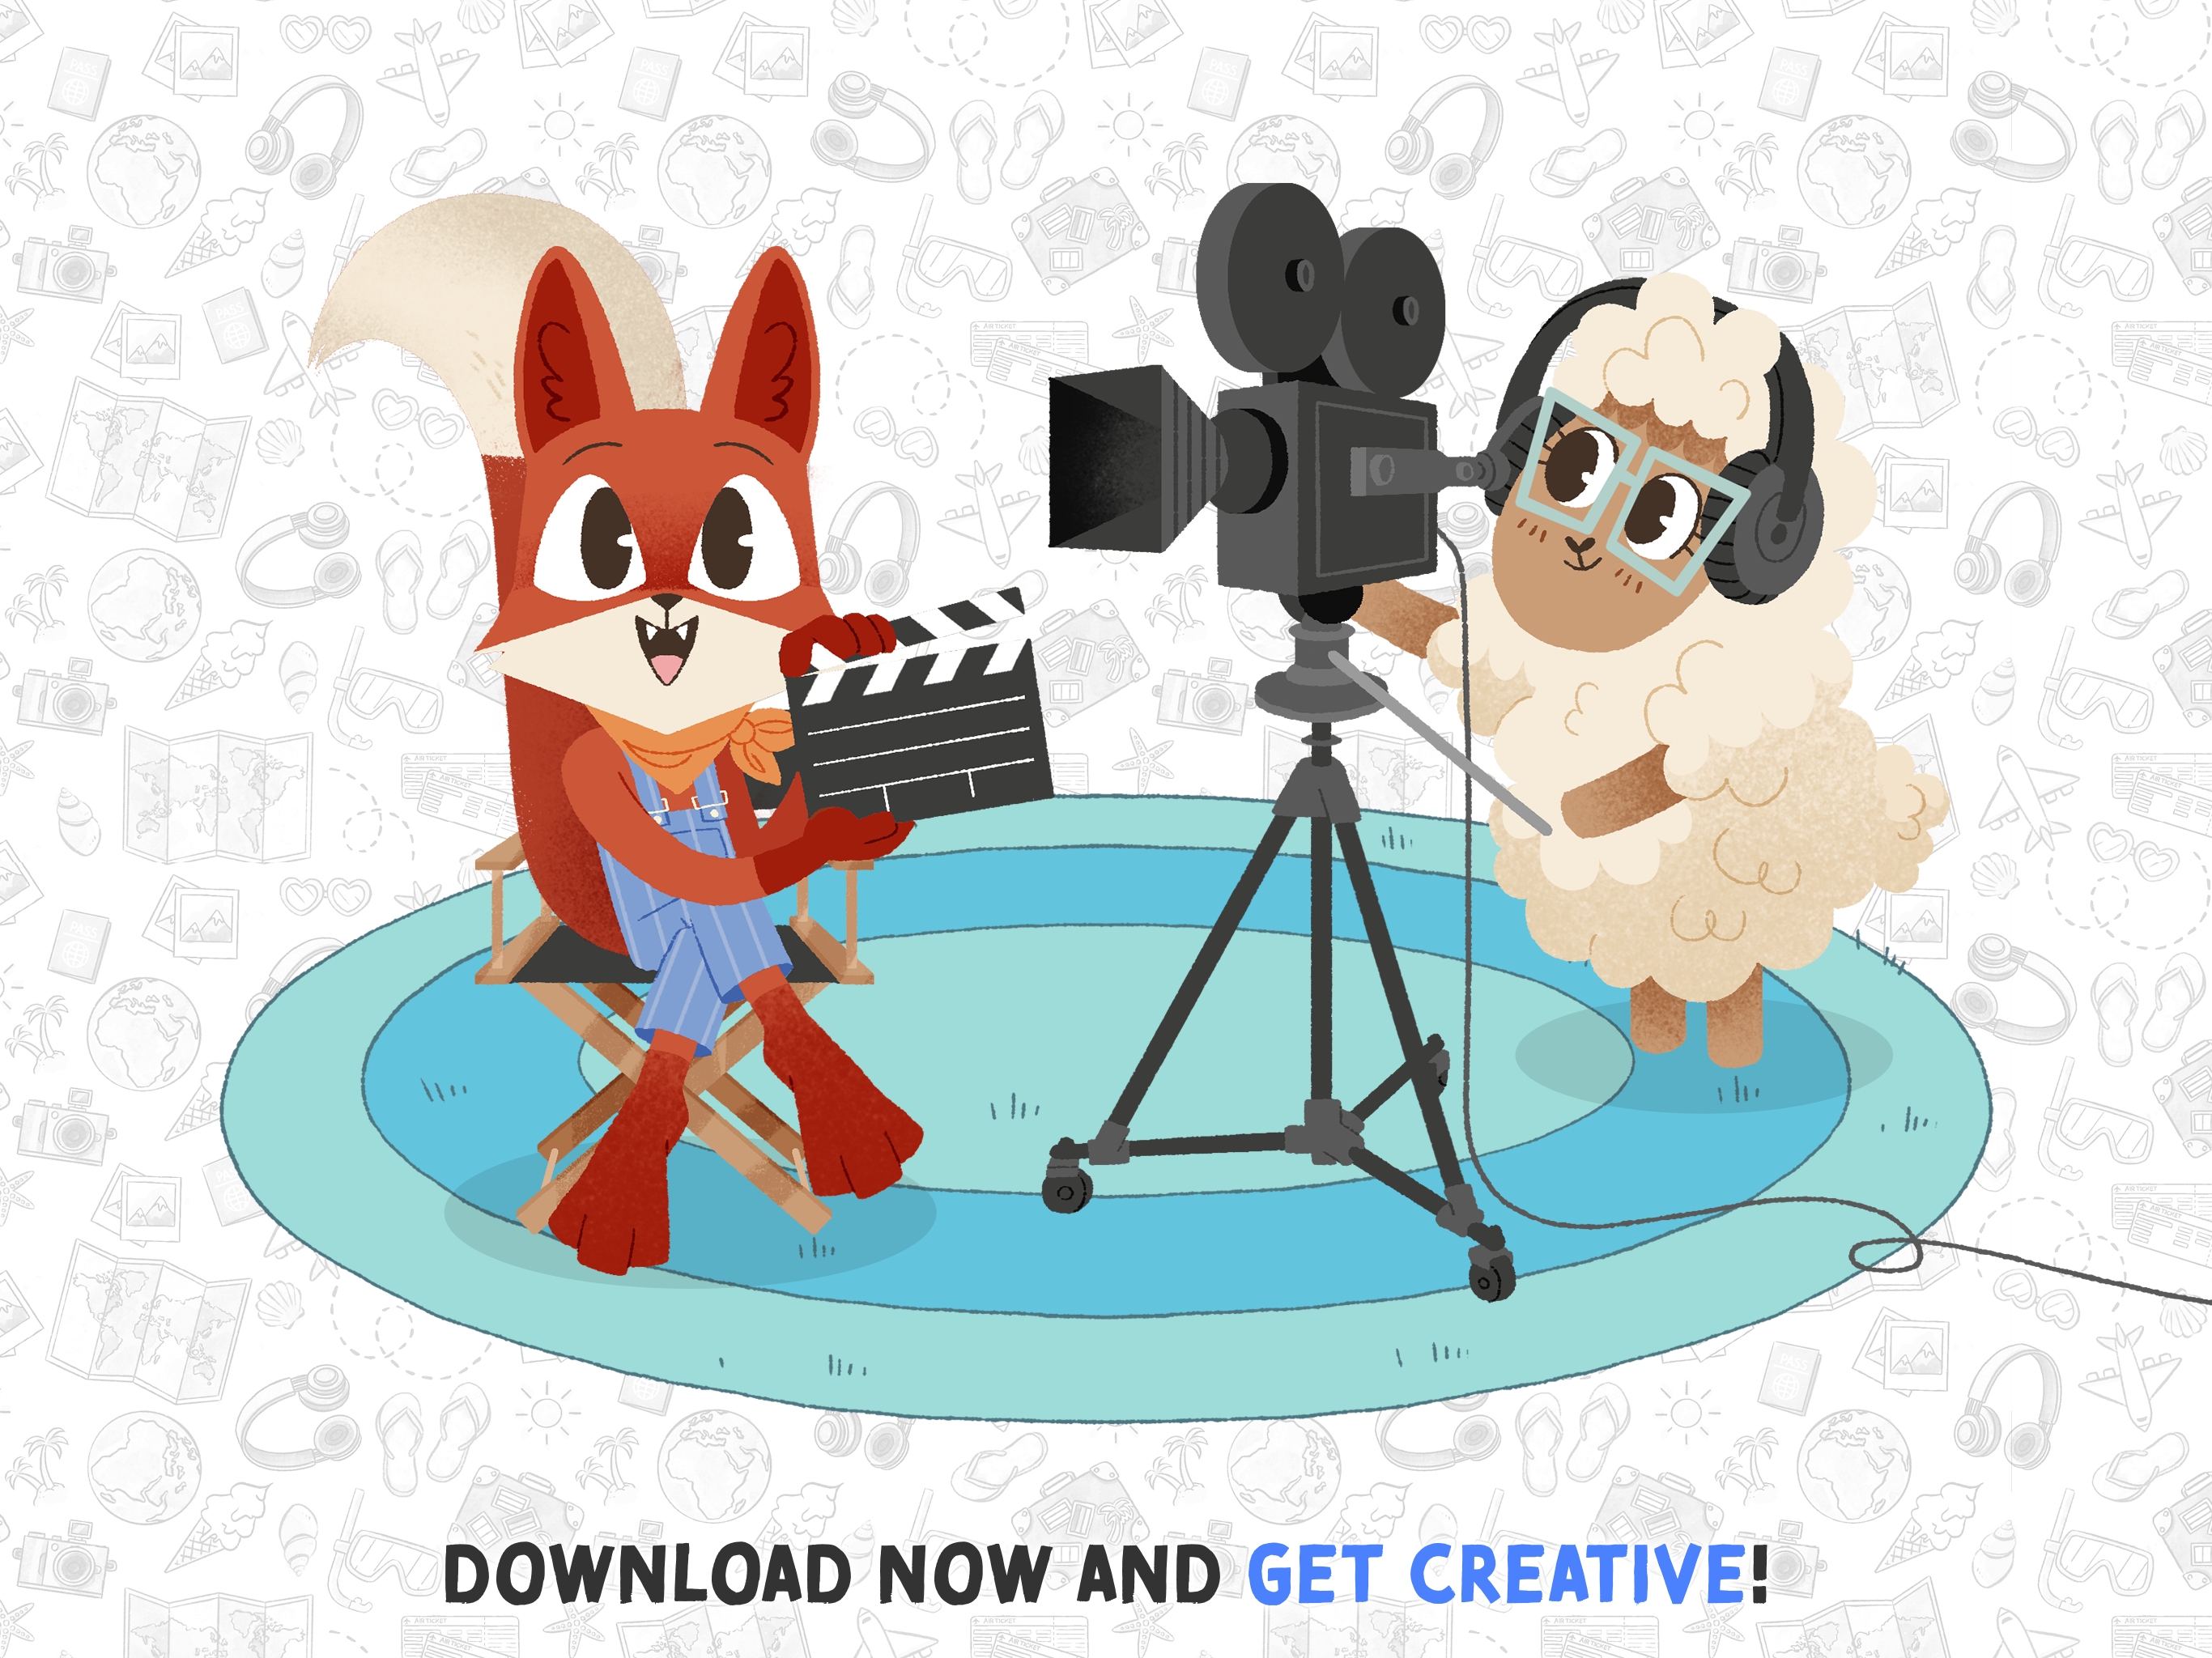 Movie Maker App for Kids – Create and share your own movie